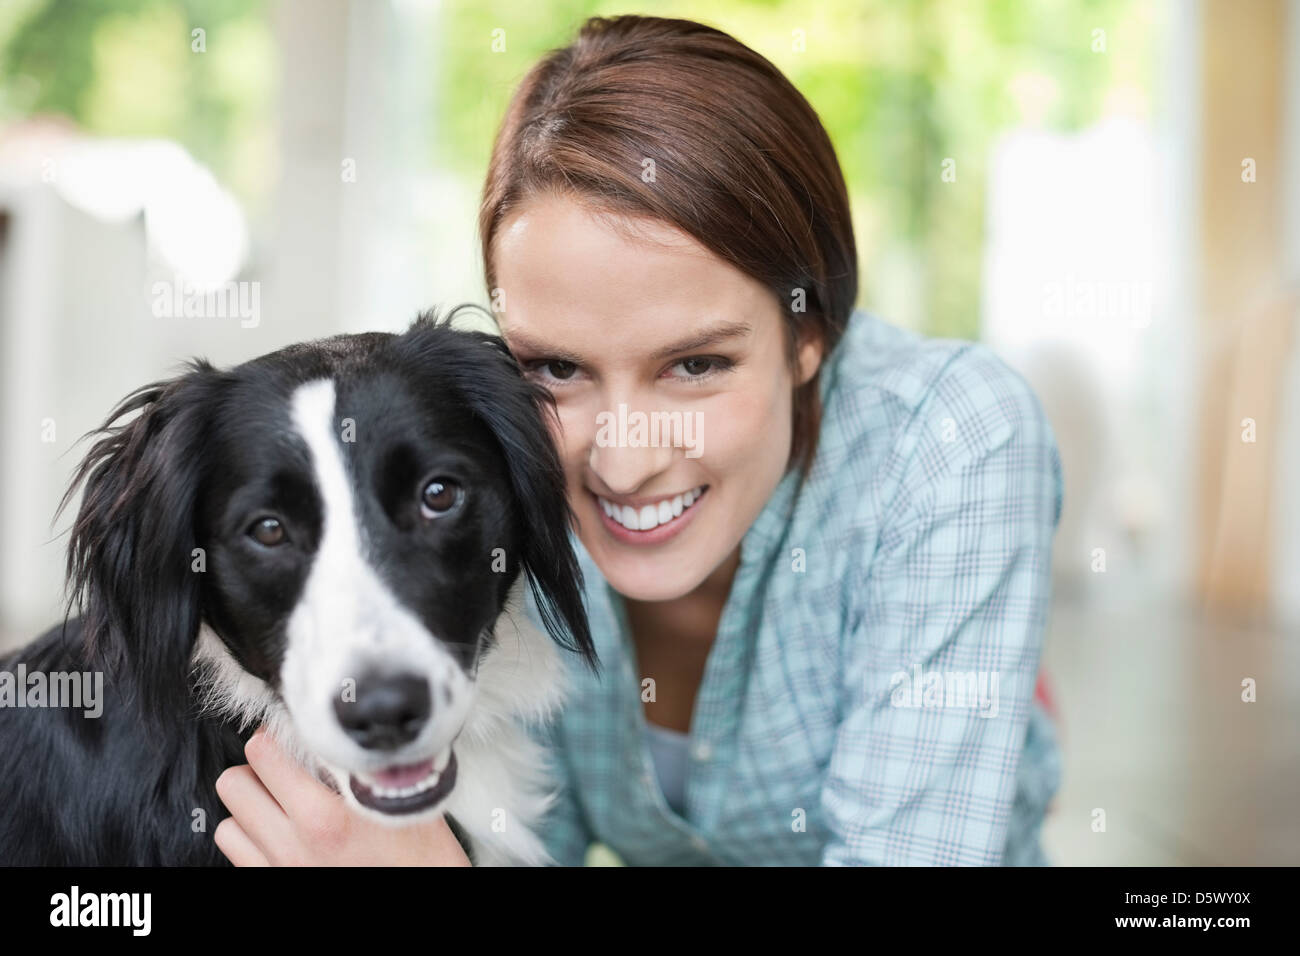 Smiling woman petting dog indoors Banque D'Images